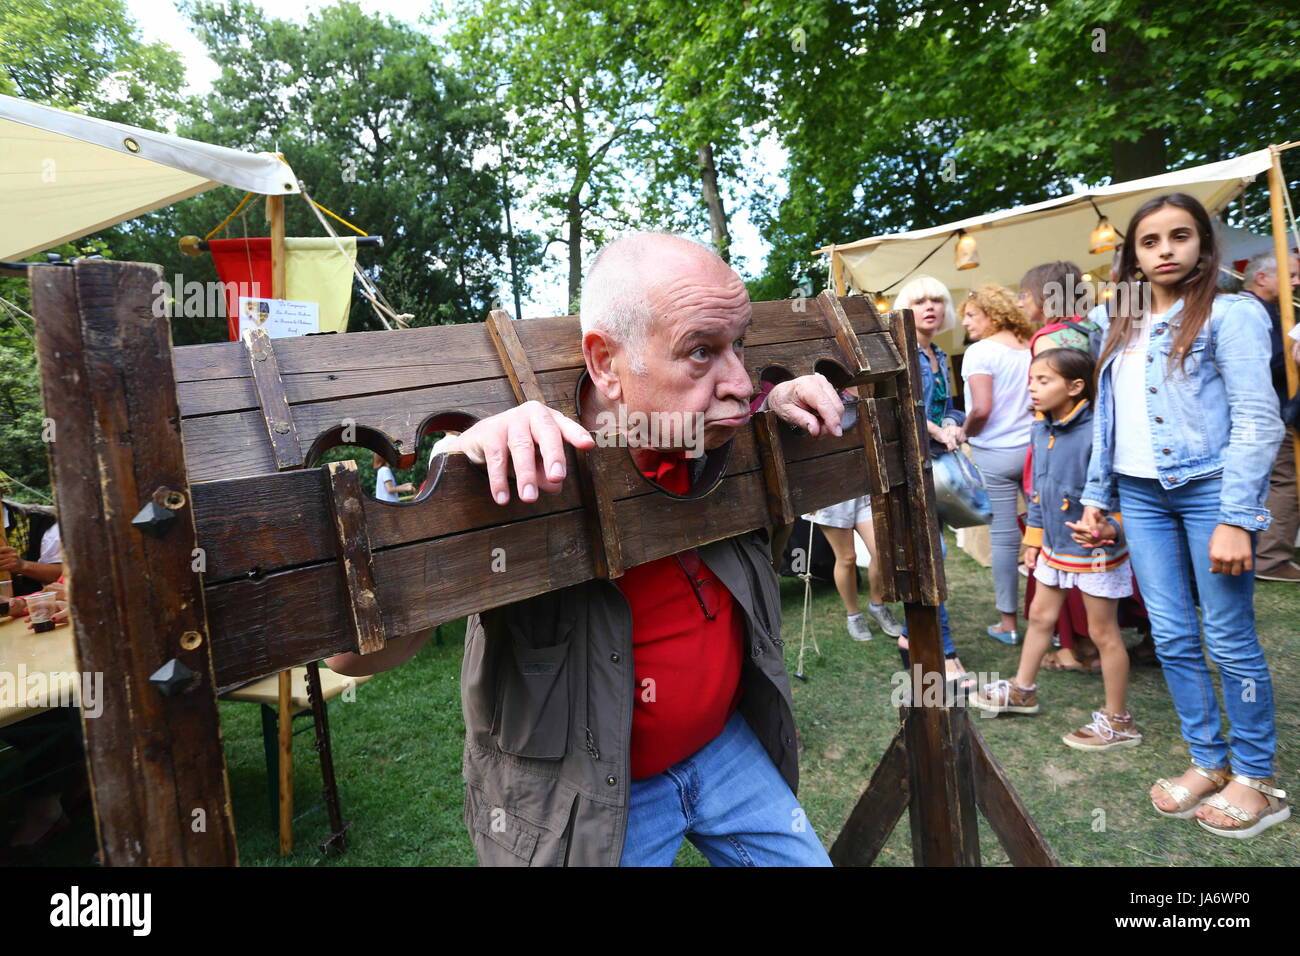 Brussels, Belgium. 4th June, 2017. A man tries a medieval instrument of torture during a medieval festival in Brussels, Belgium, June 4, 2017. Credit: Gong Bing/Xinhua/Alamy Live News Stock Photo